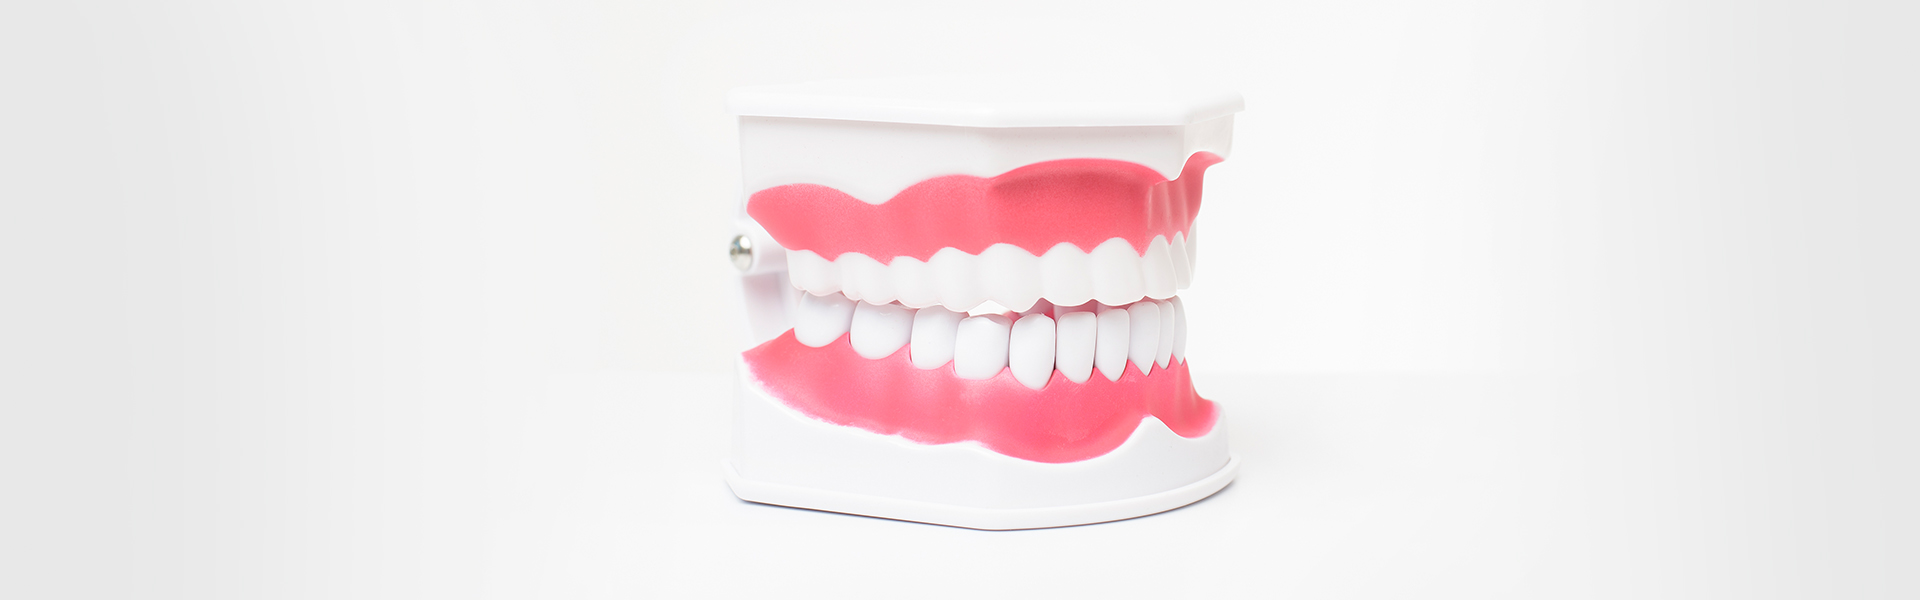 What You Should Know Before You Get Dentures